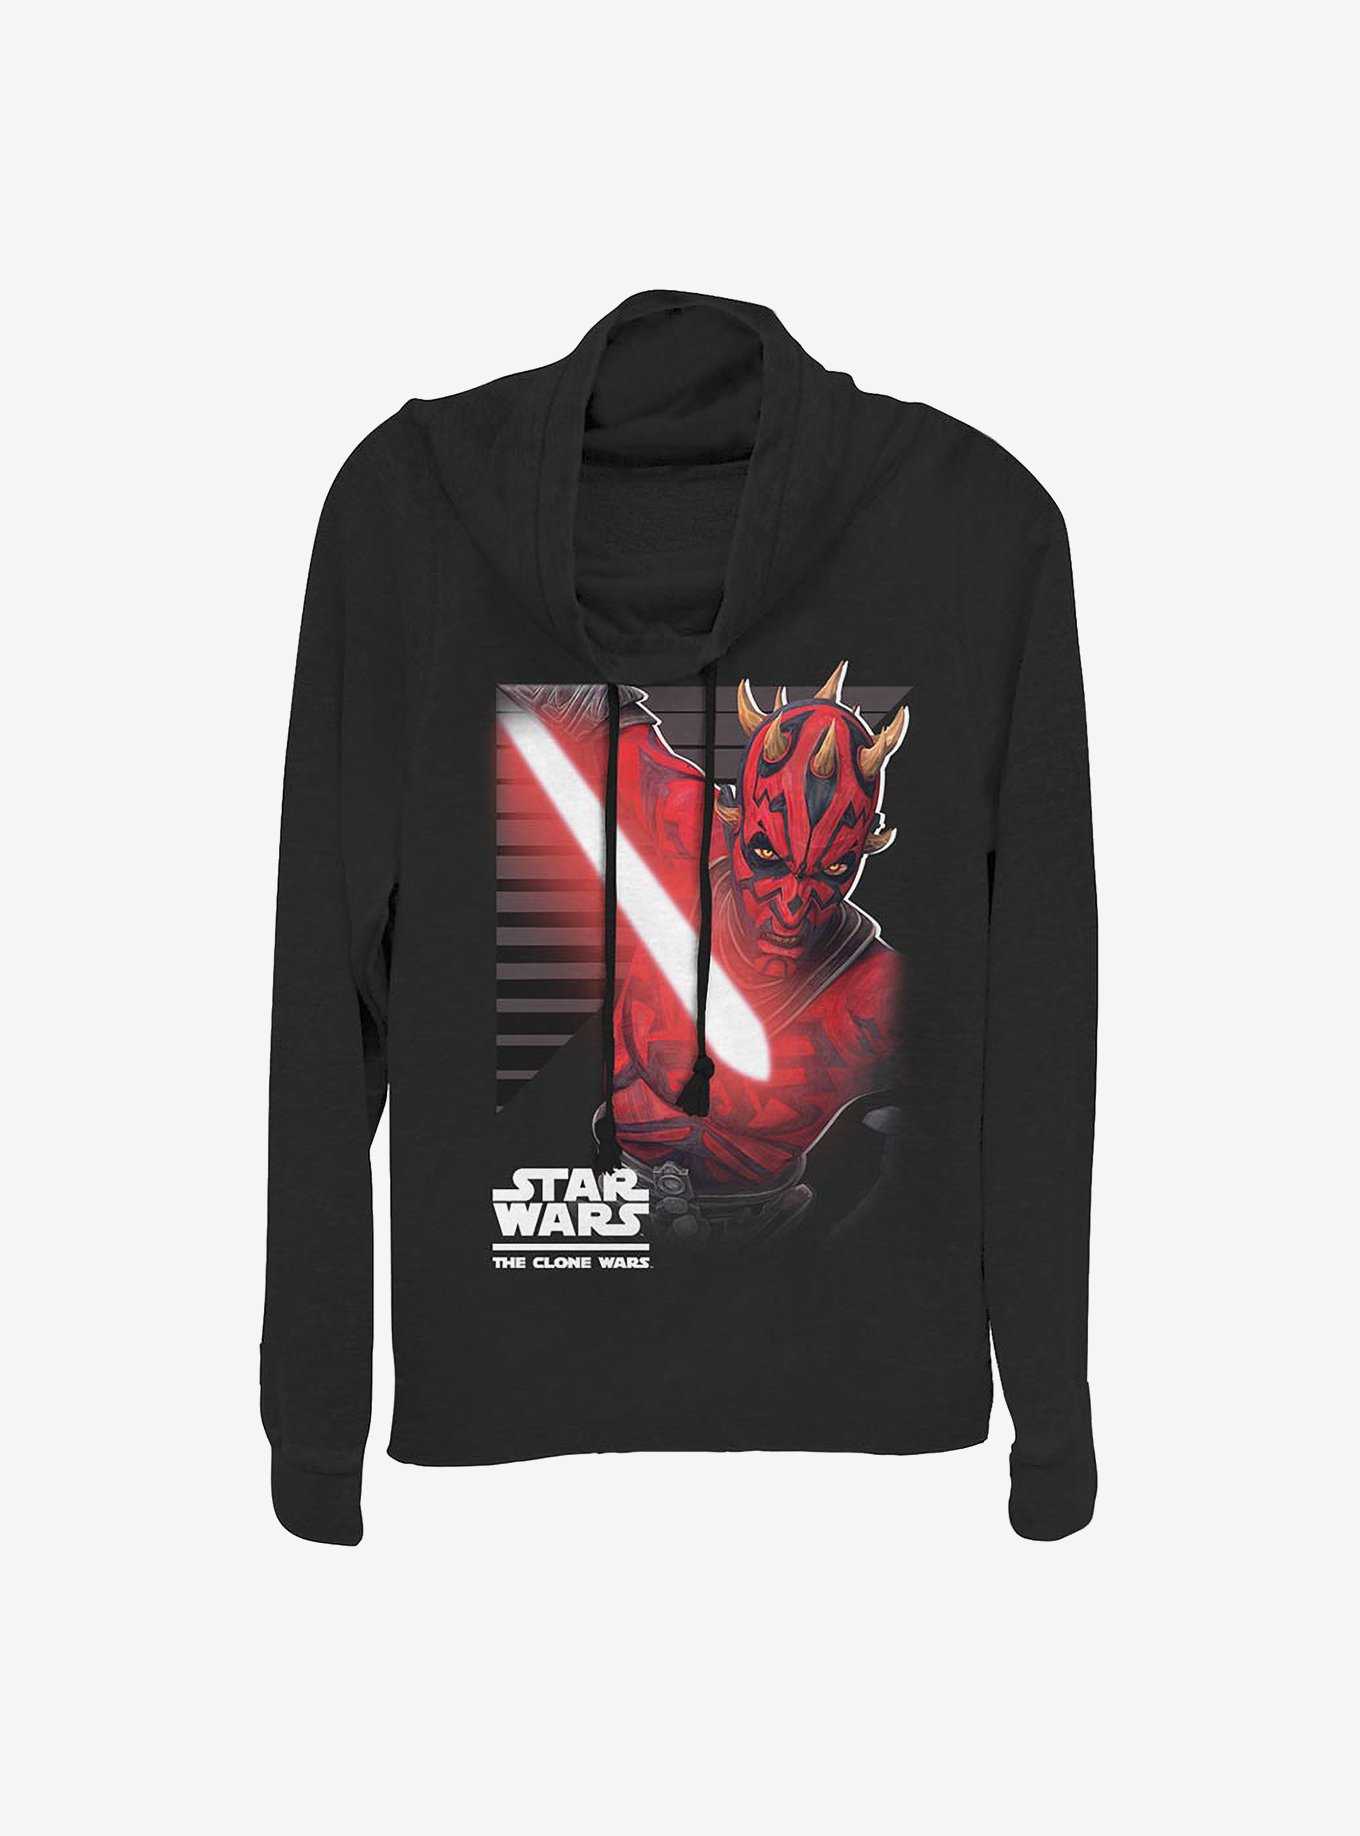 Star Wars: The Clone Wars Maul Strikes Cowlneck Long-Sleeve Girls Top, , hi-res